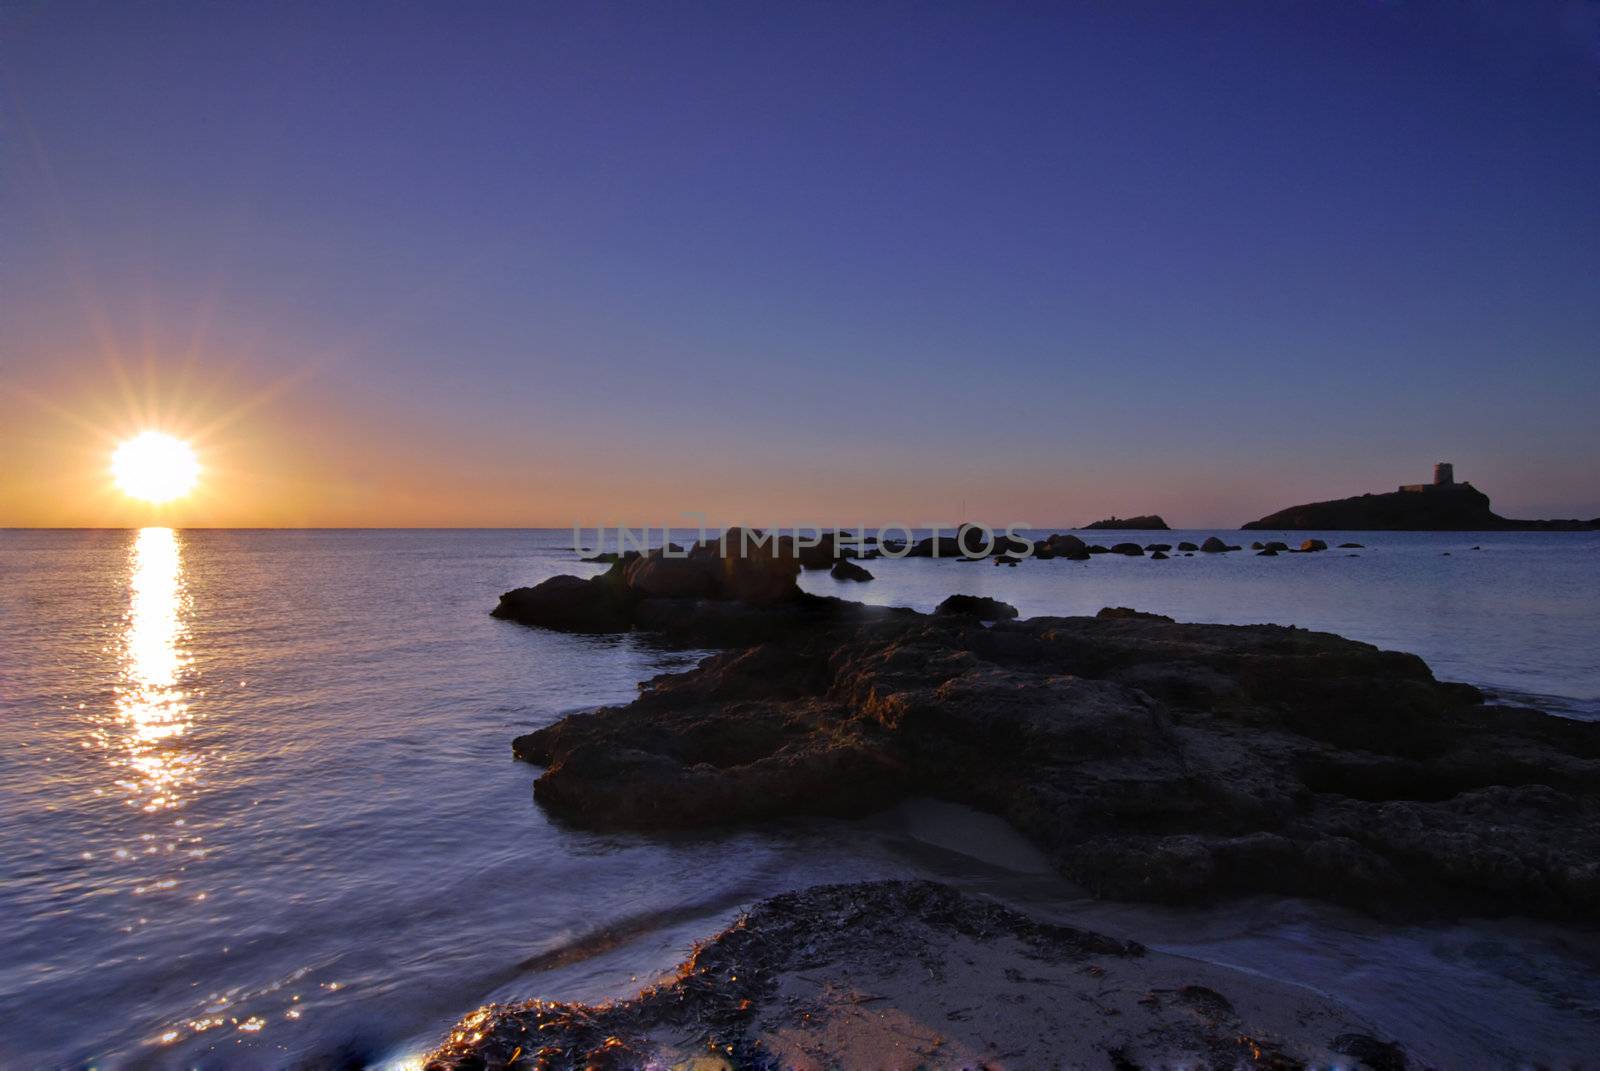 Sunrise in Sardinia with distant lighthouse and stone pier